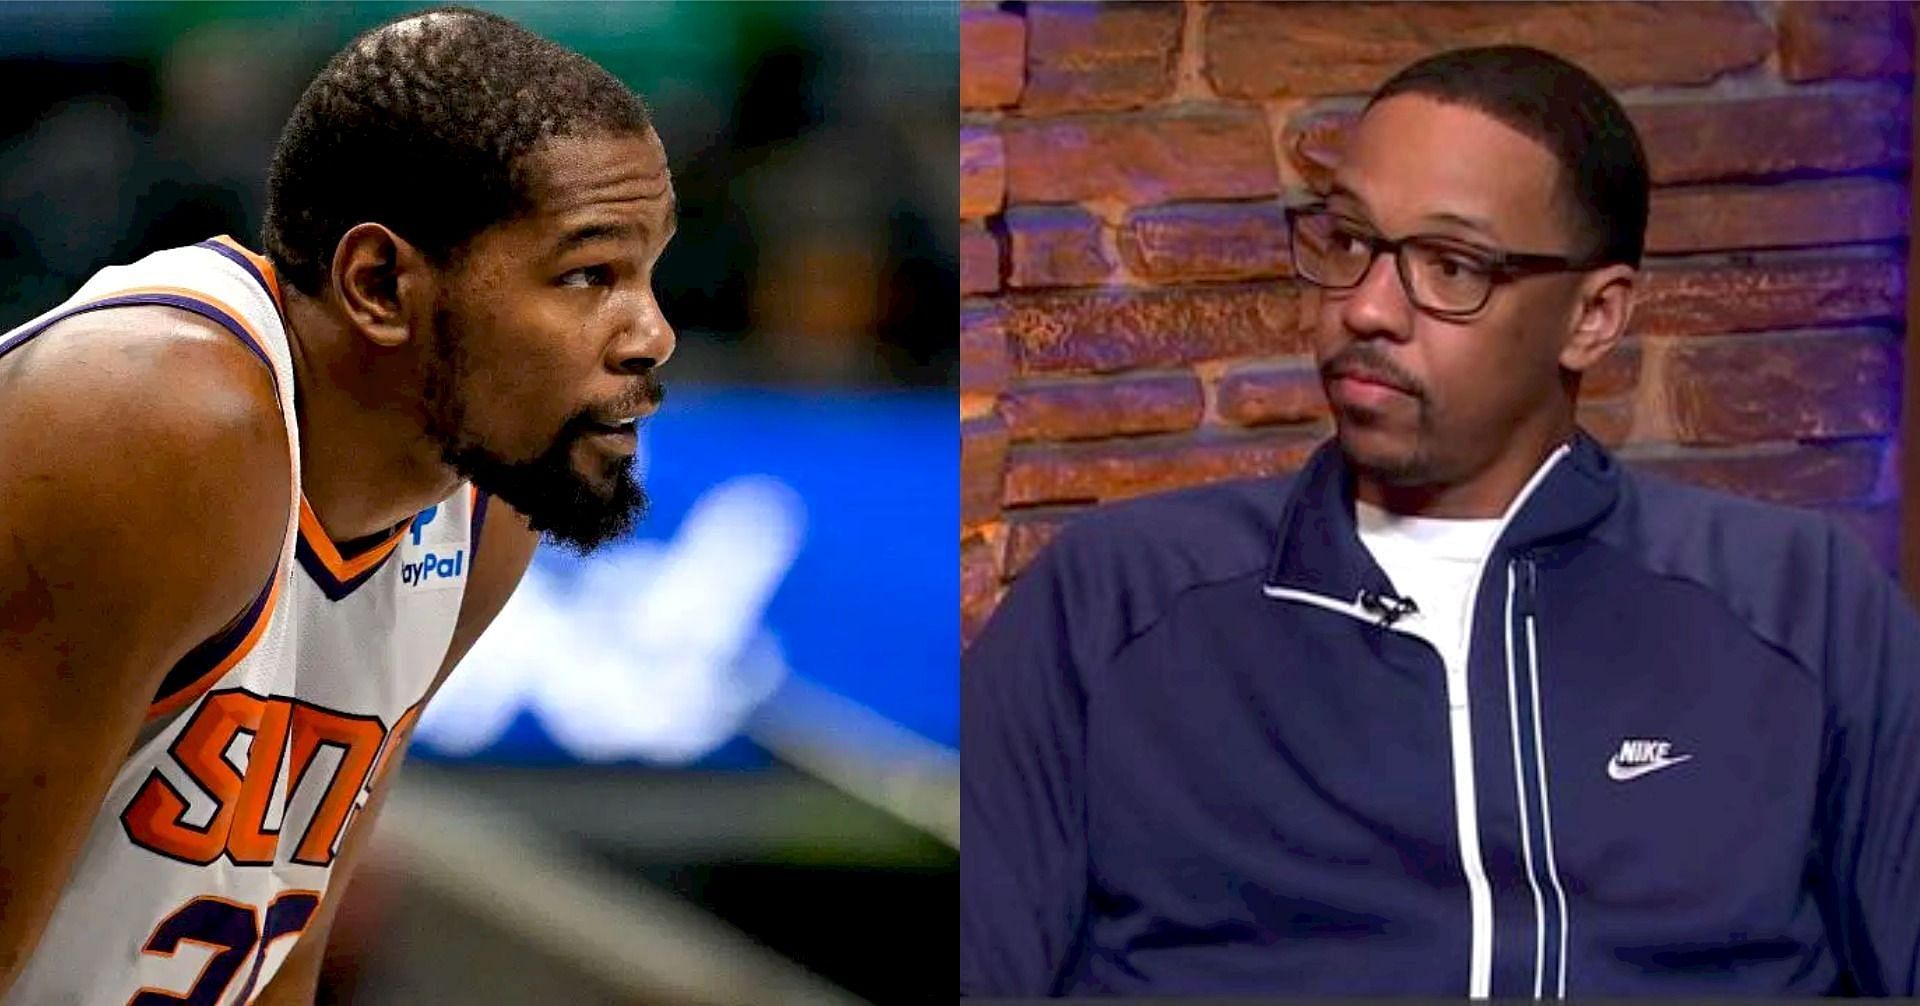 Phoenix Suns superstar forward Kevin Durant and former NBA champion Channing Frye